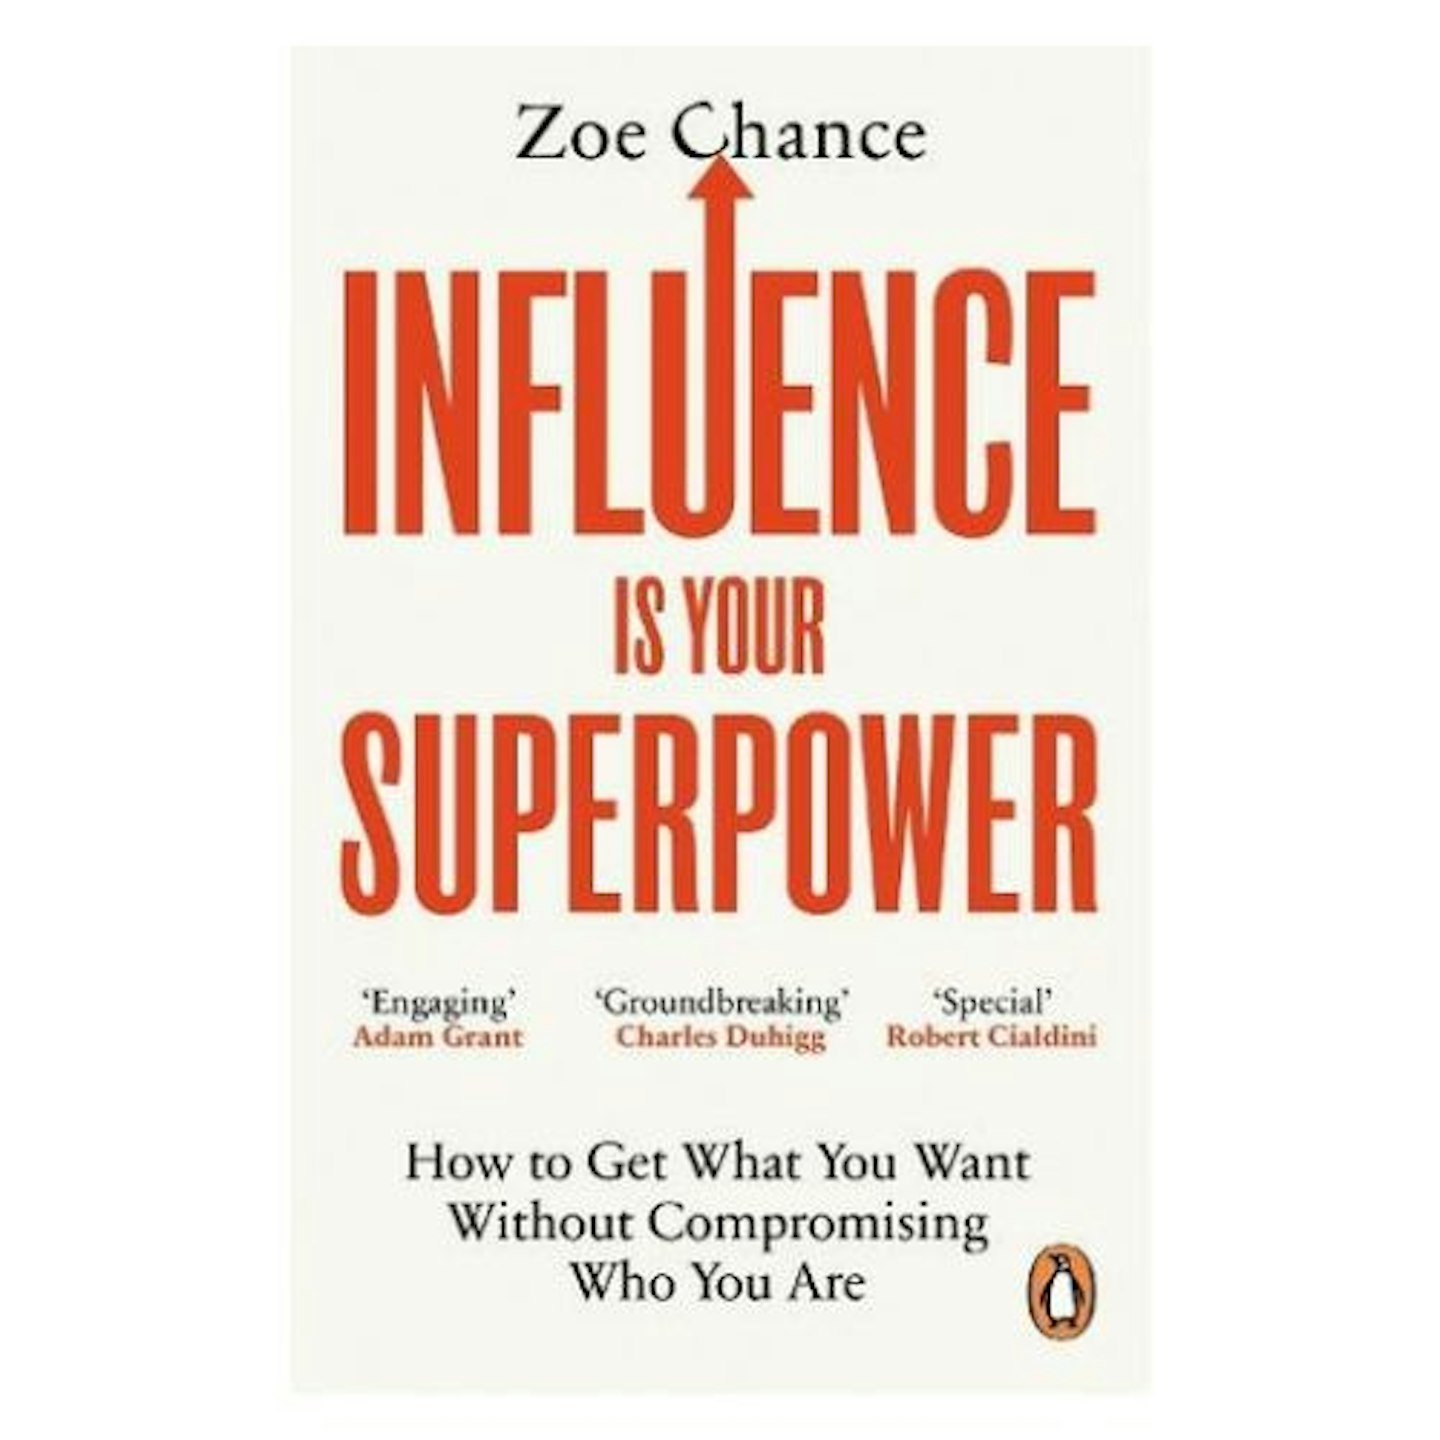 Influence is Your Superpower by Zoe Chance